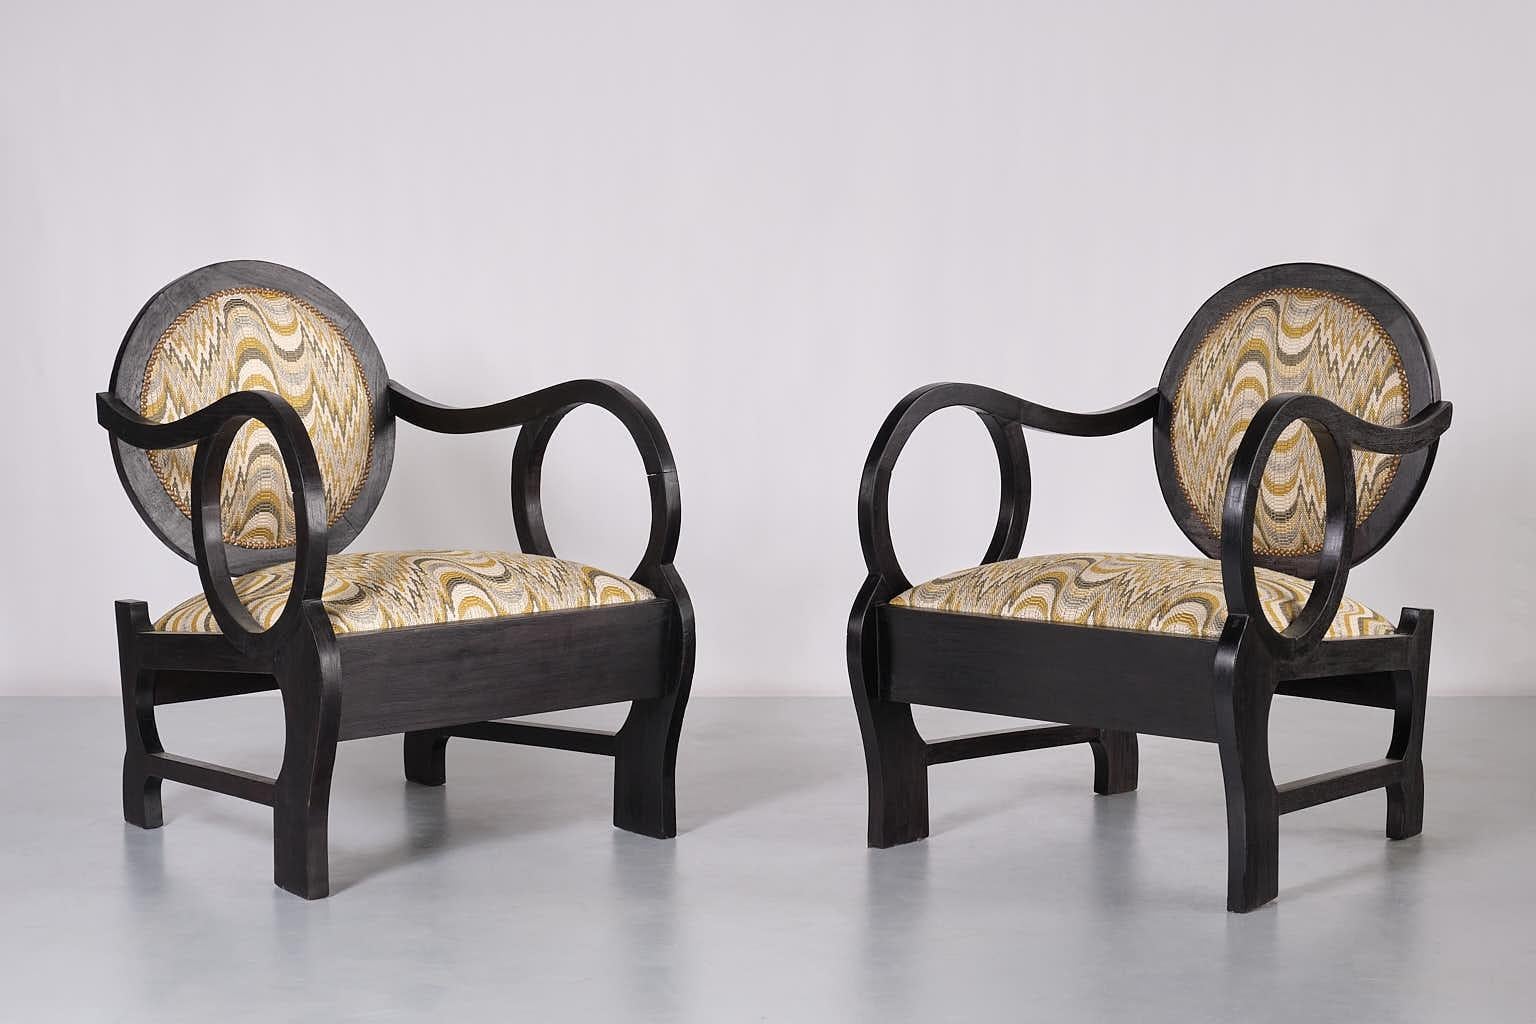 Art Deco Pair of Lajos Kozma Attributed Armchairs in Oak and Dedar Jacquard, Late 1940s For Sale